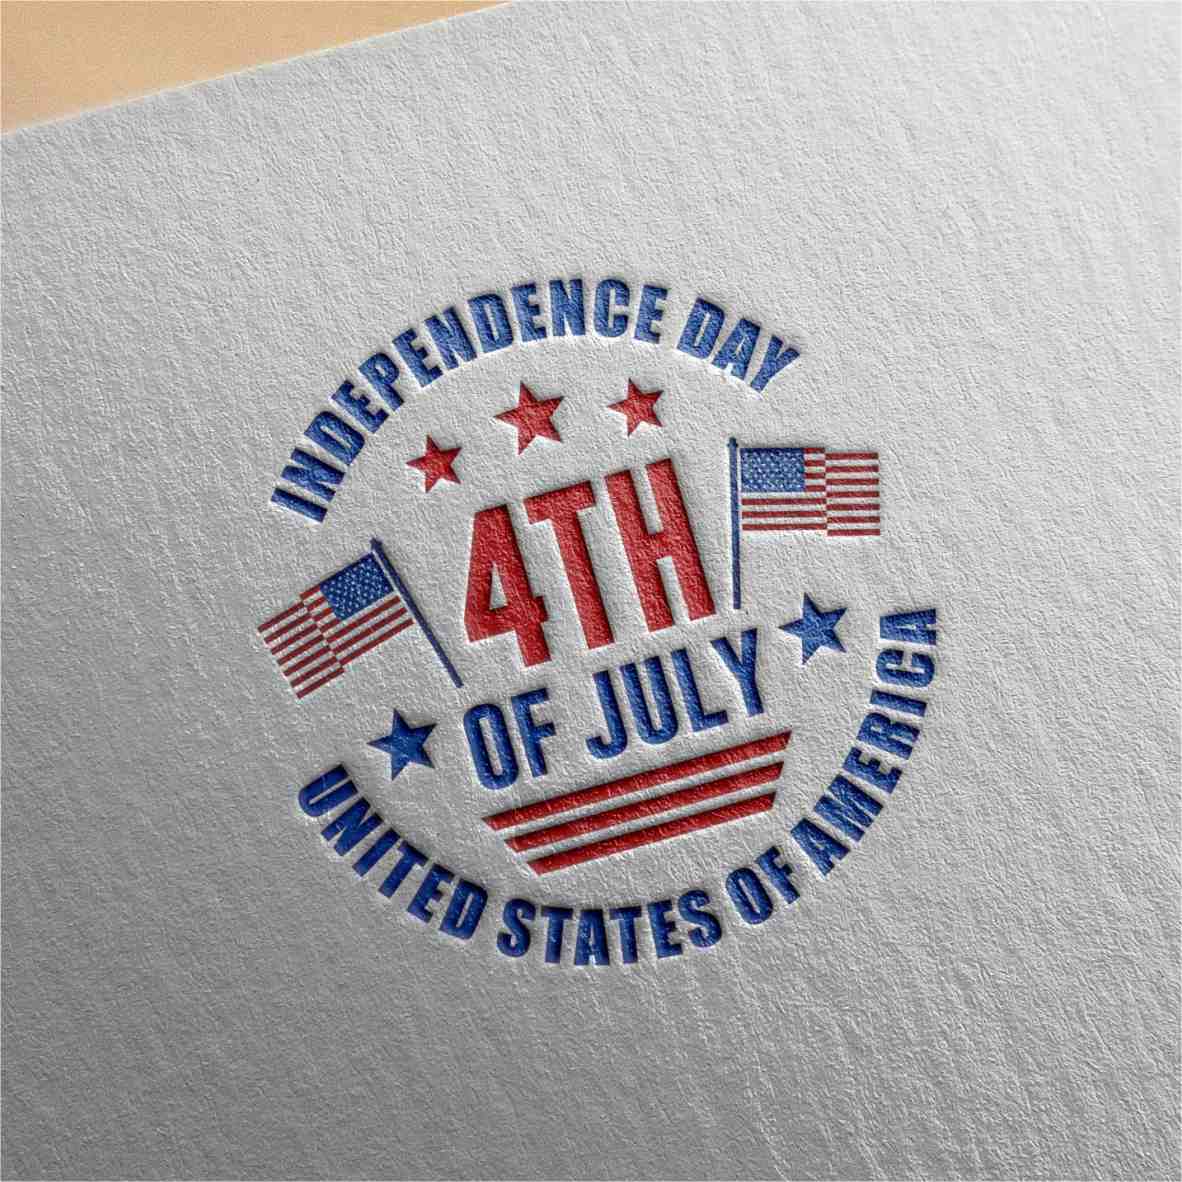 independence day 4 th july united states 10 241